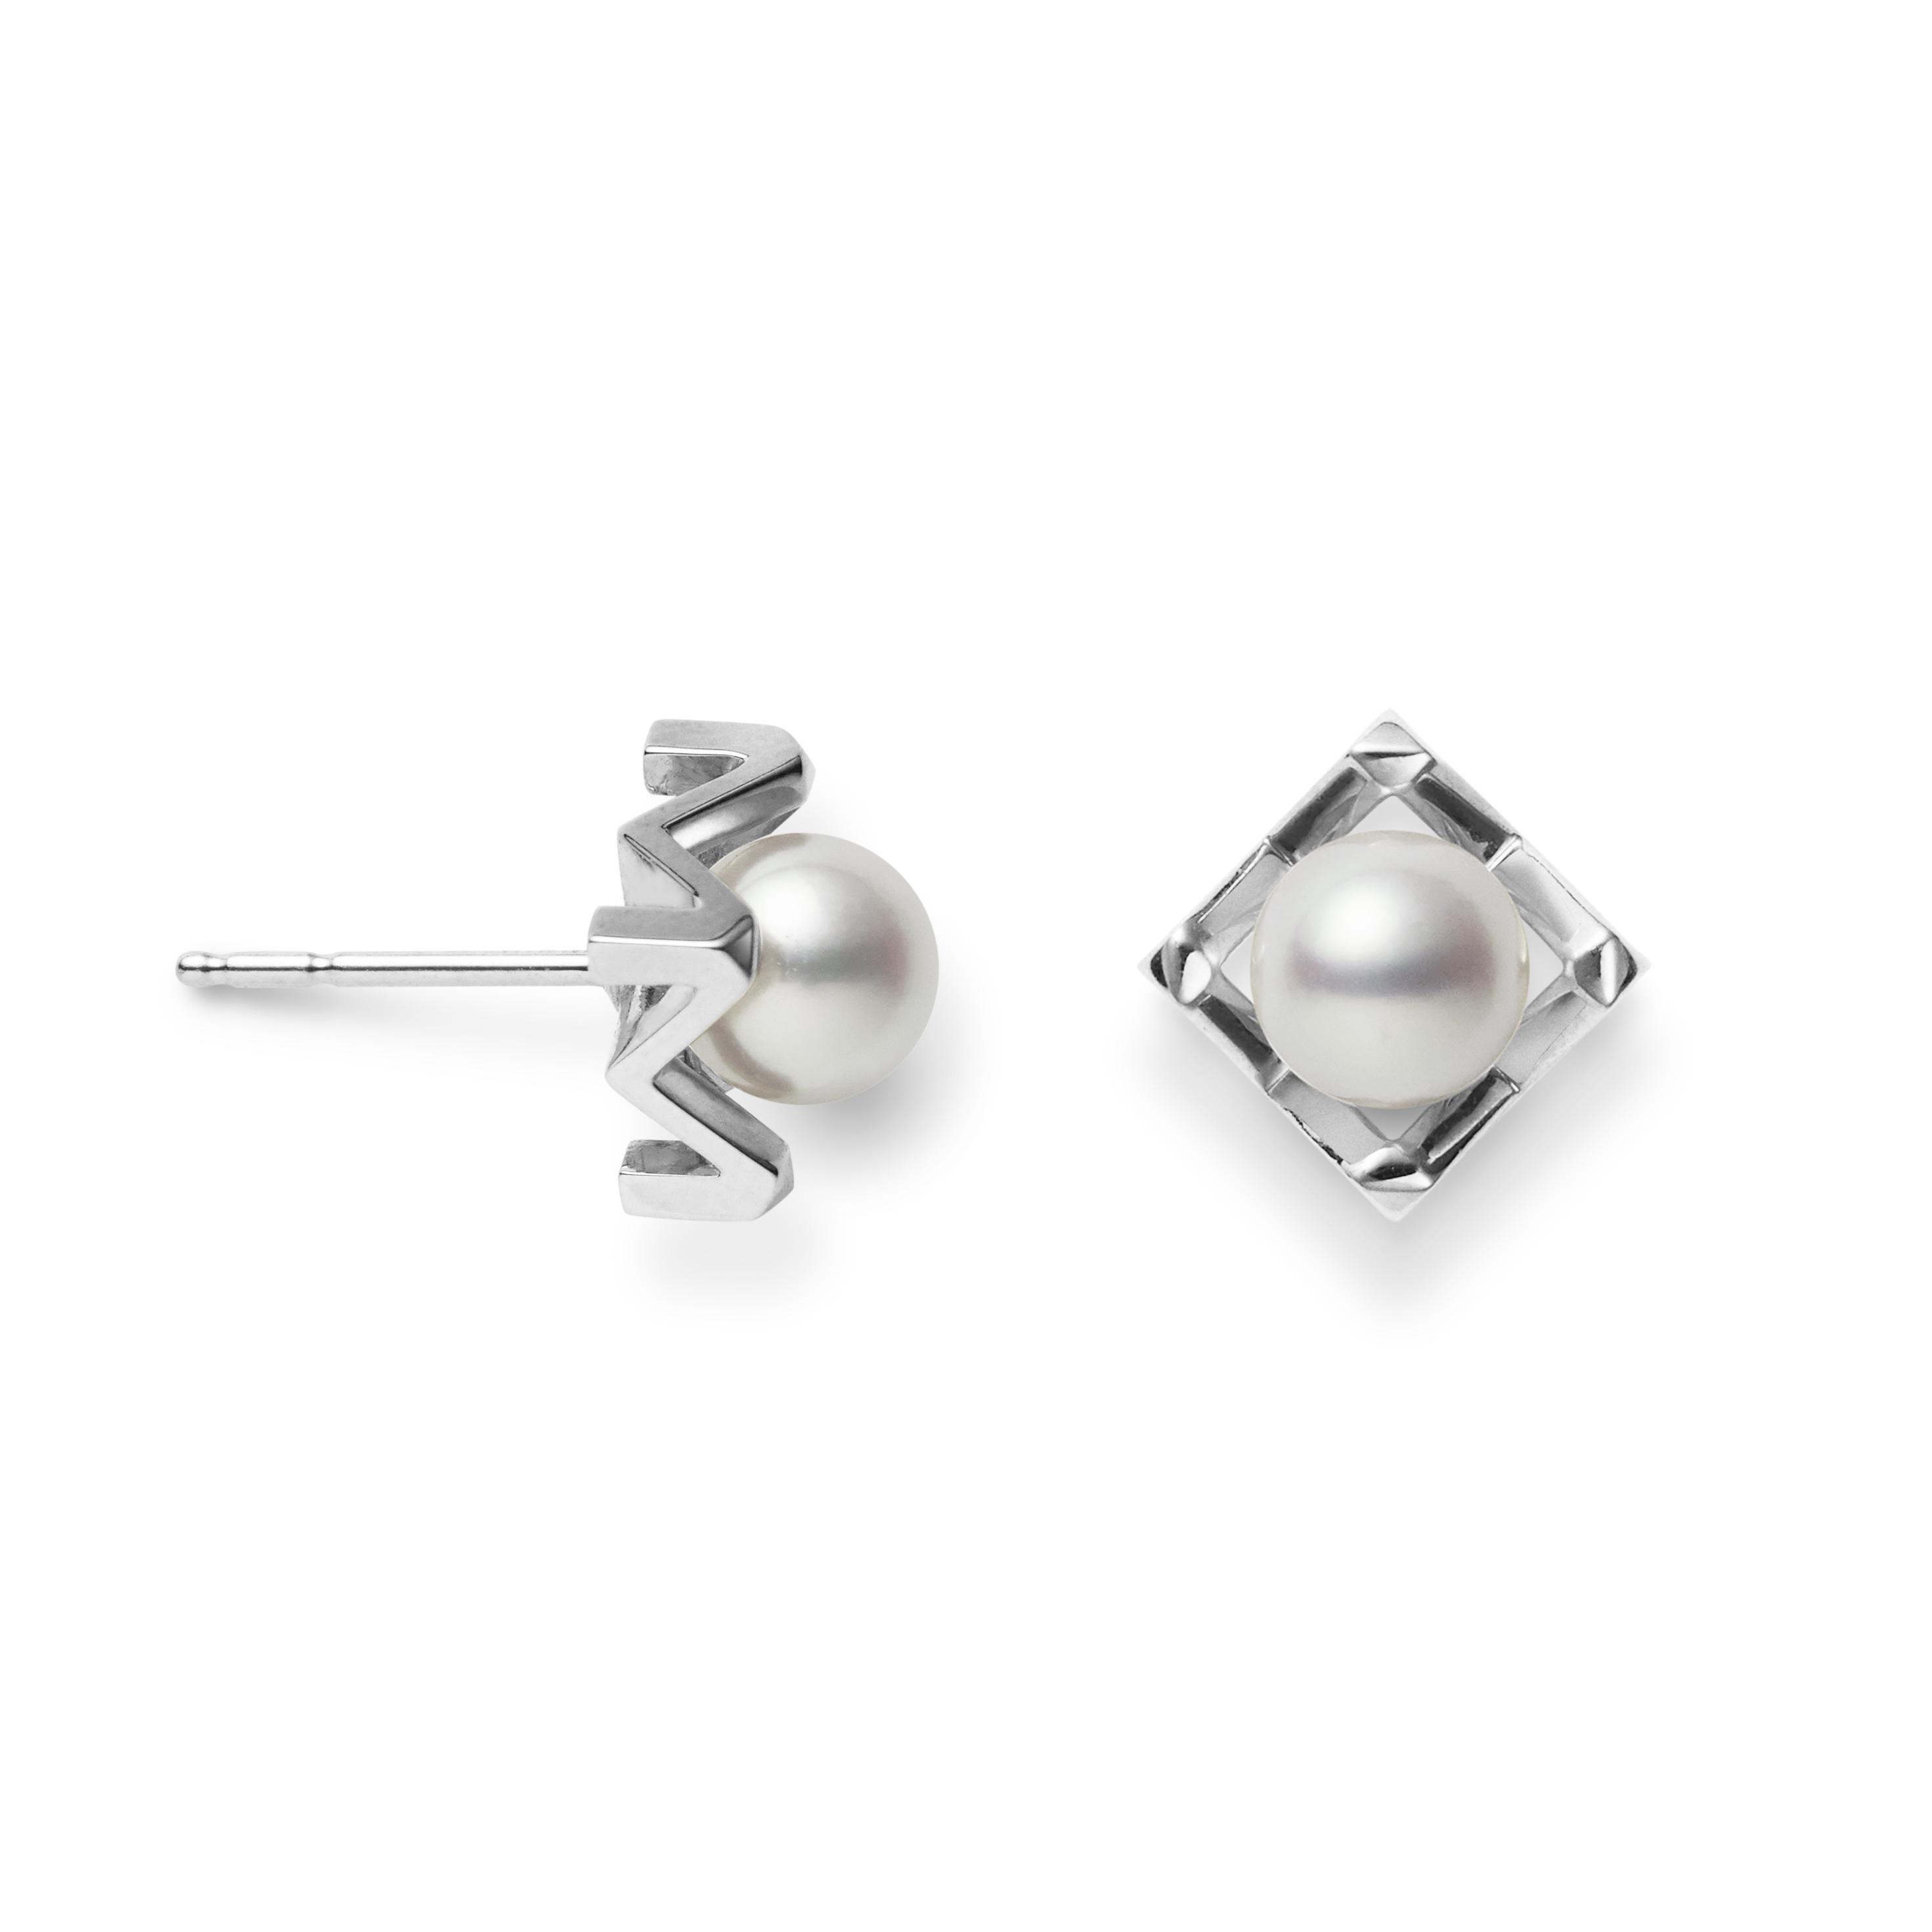 Mikimoto M Collection Akoya Cultured Pearl Earrings in 18K White Gold